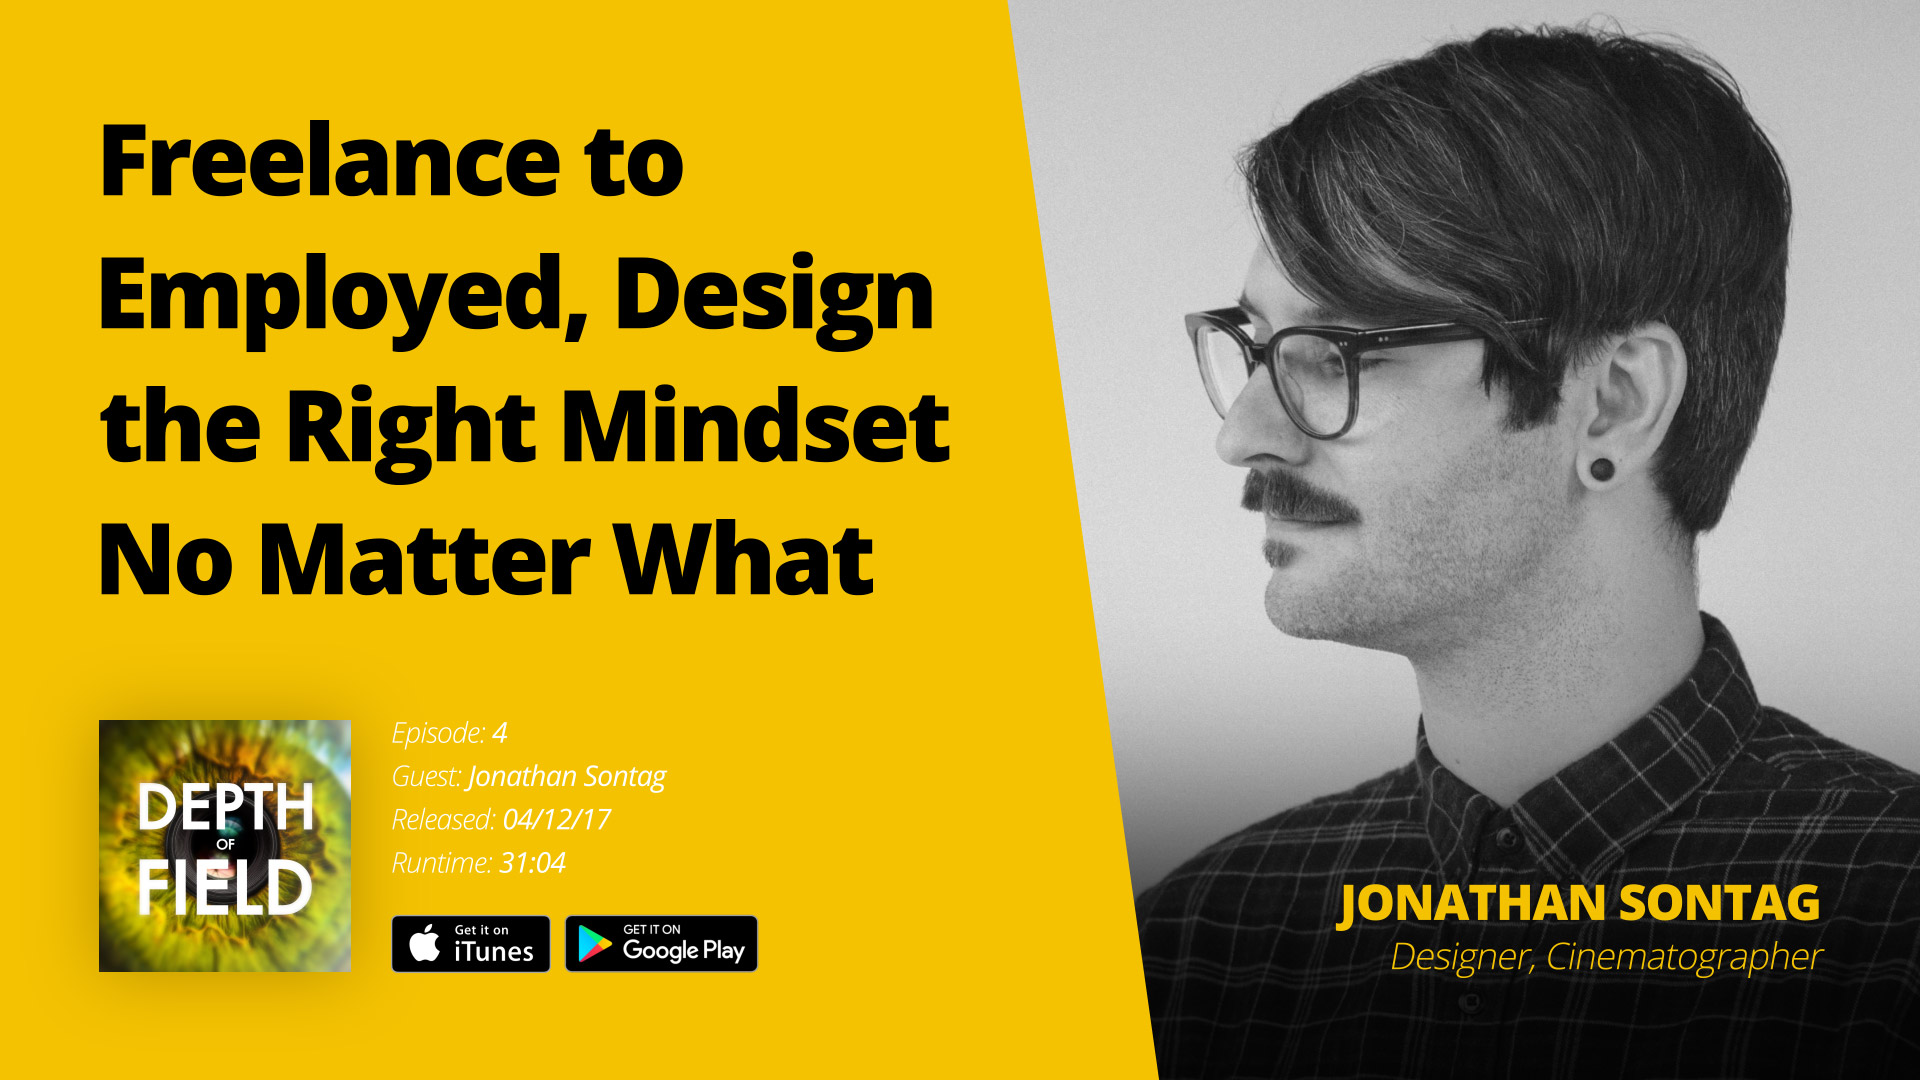 Freelance to Employed, Design the Right Mindset No Matter What